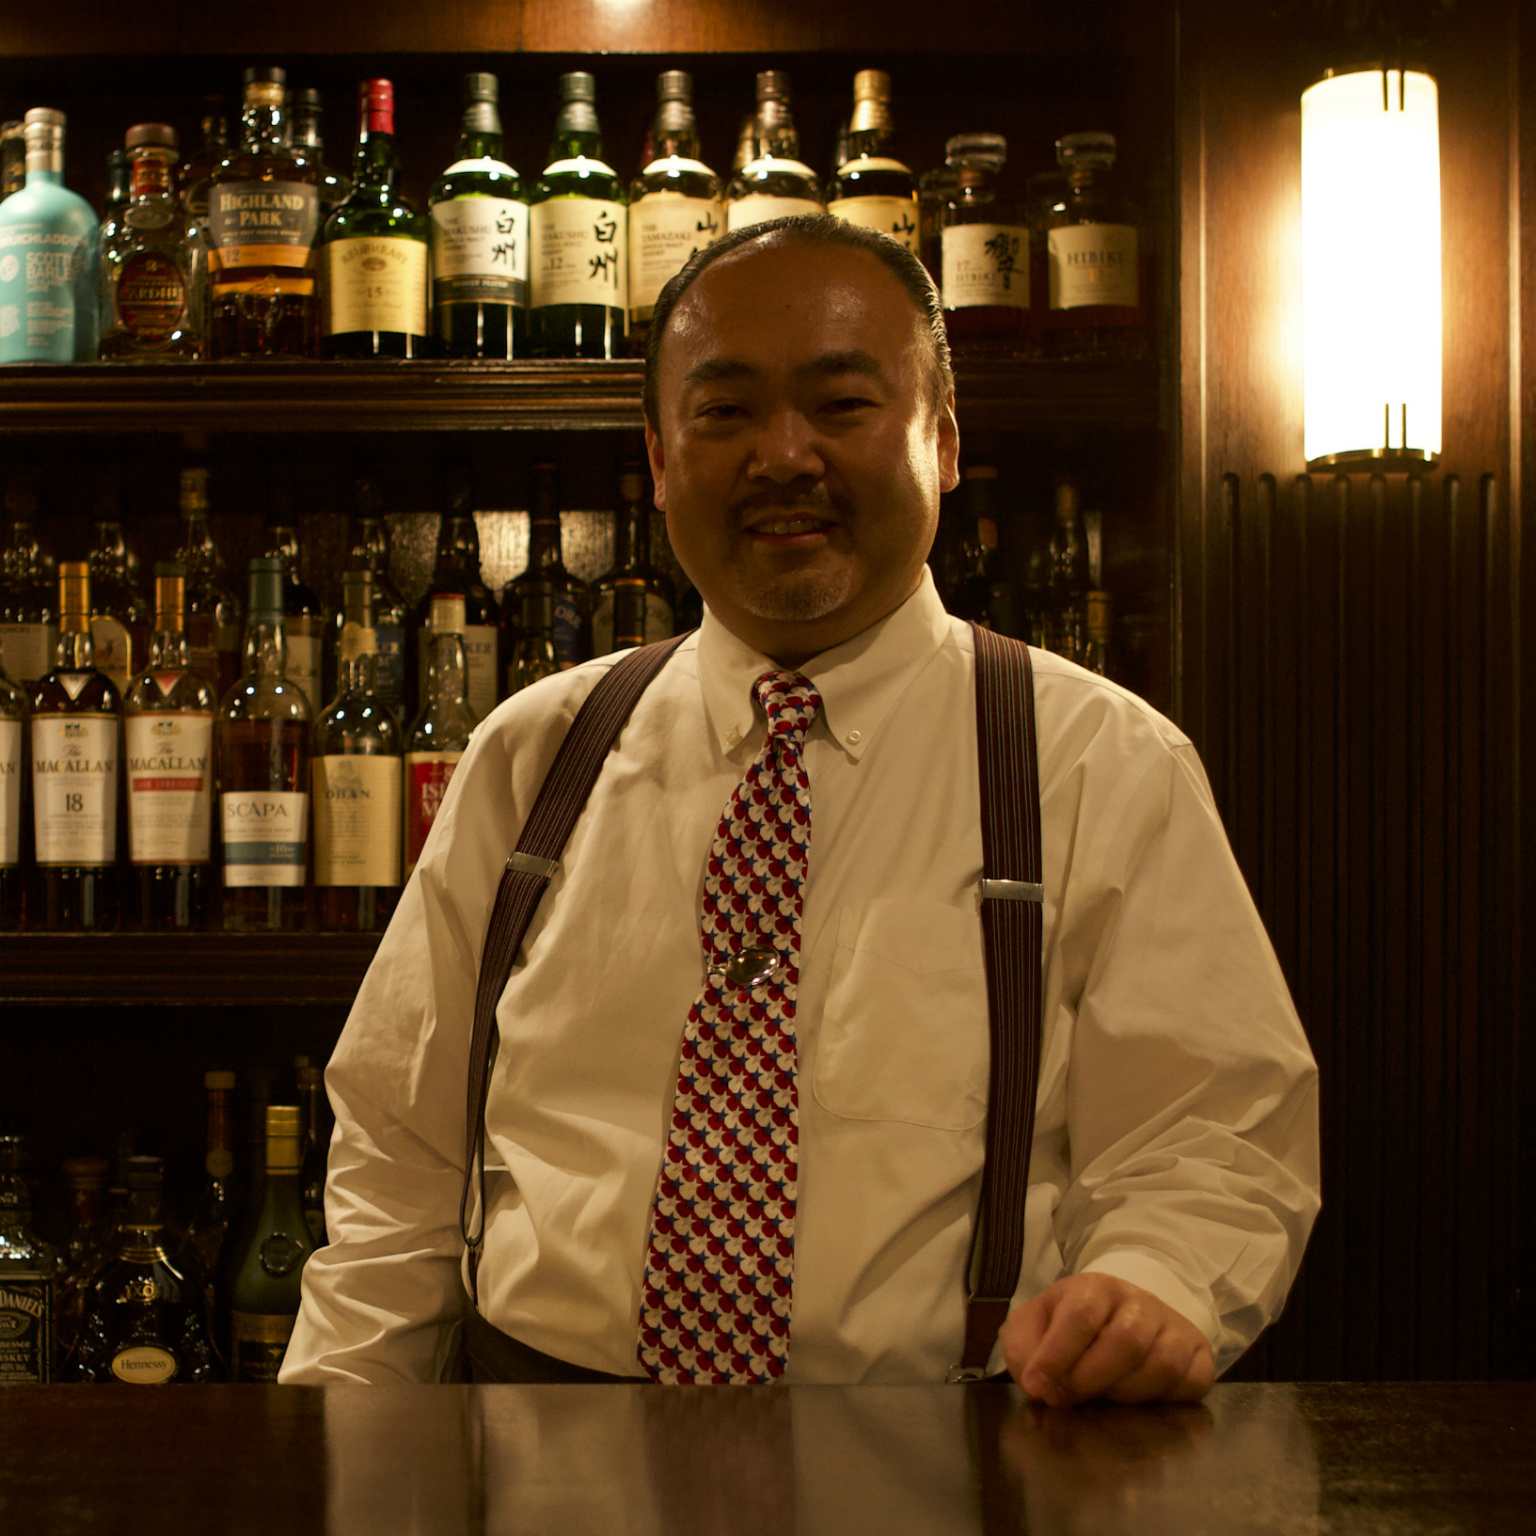 Legendary Ginza bar, where classic cocktails are made properly